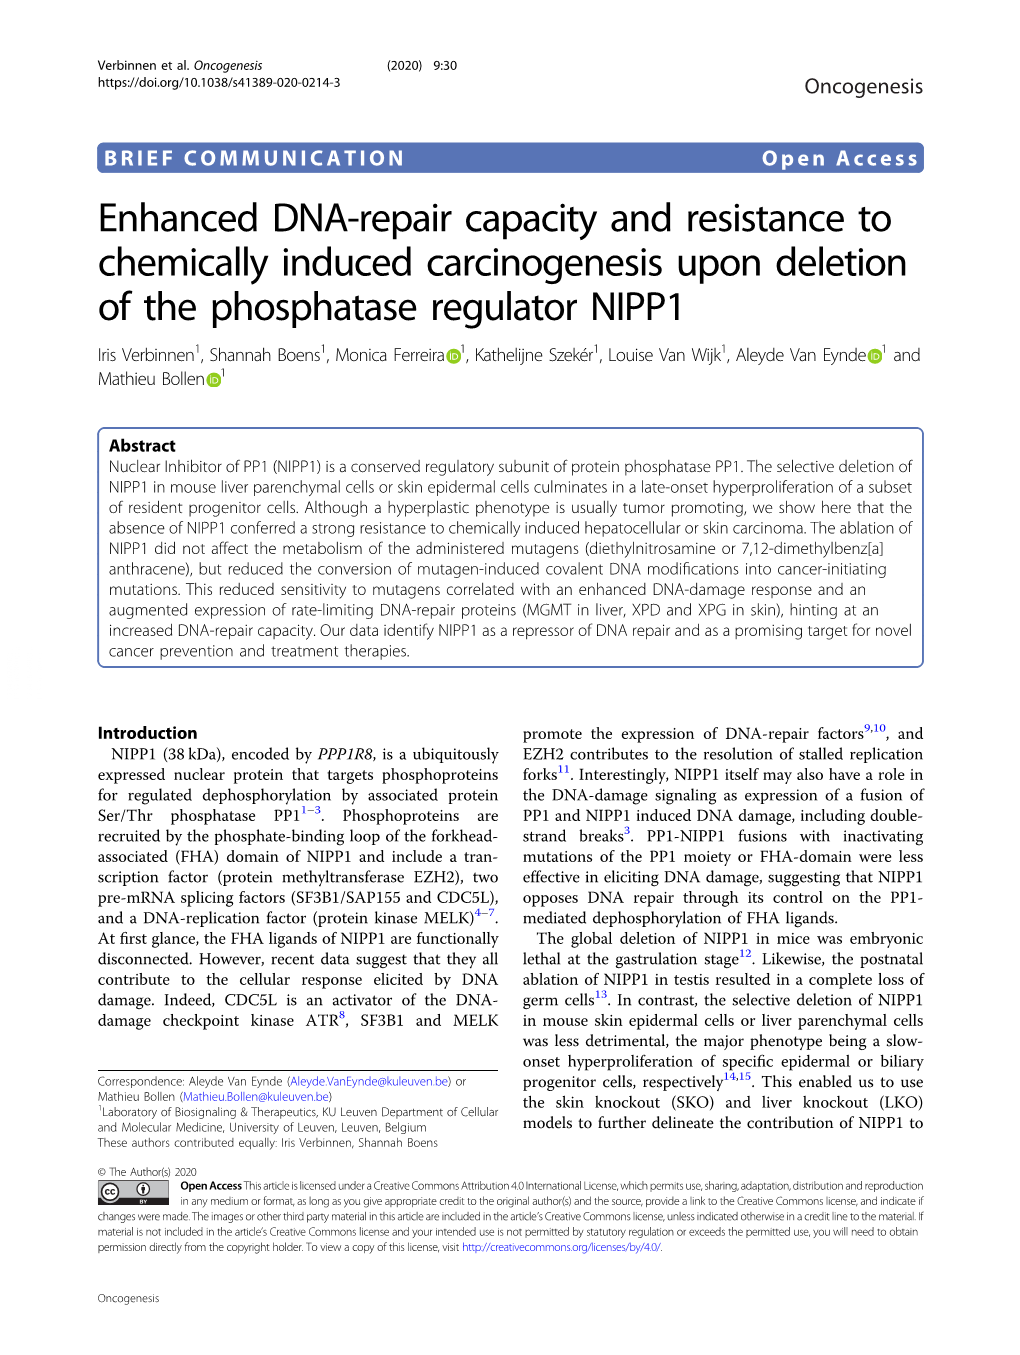 Enhanced DNA-Repair Capacity and Resistance to Chemically Induced